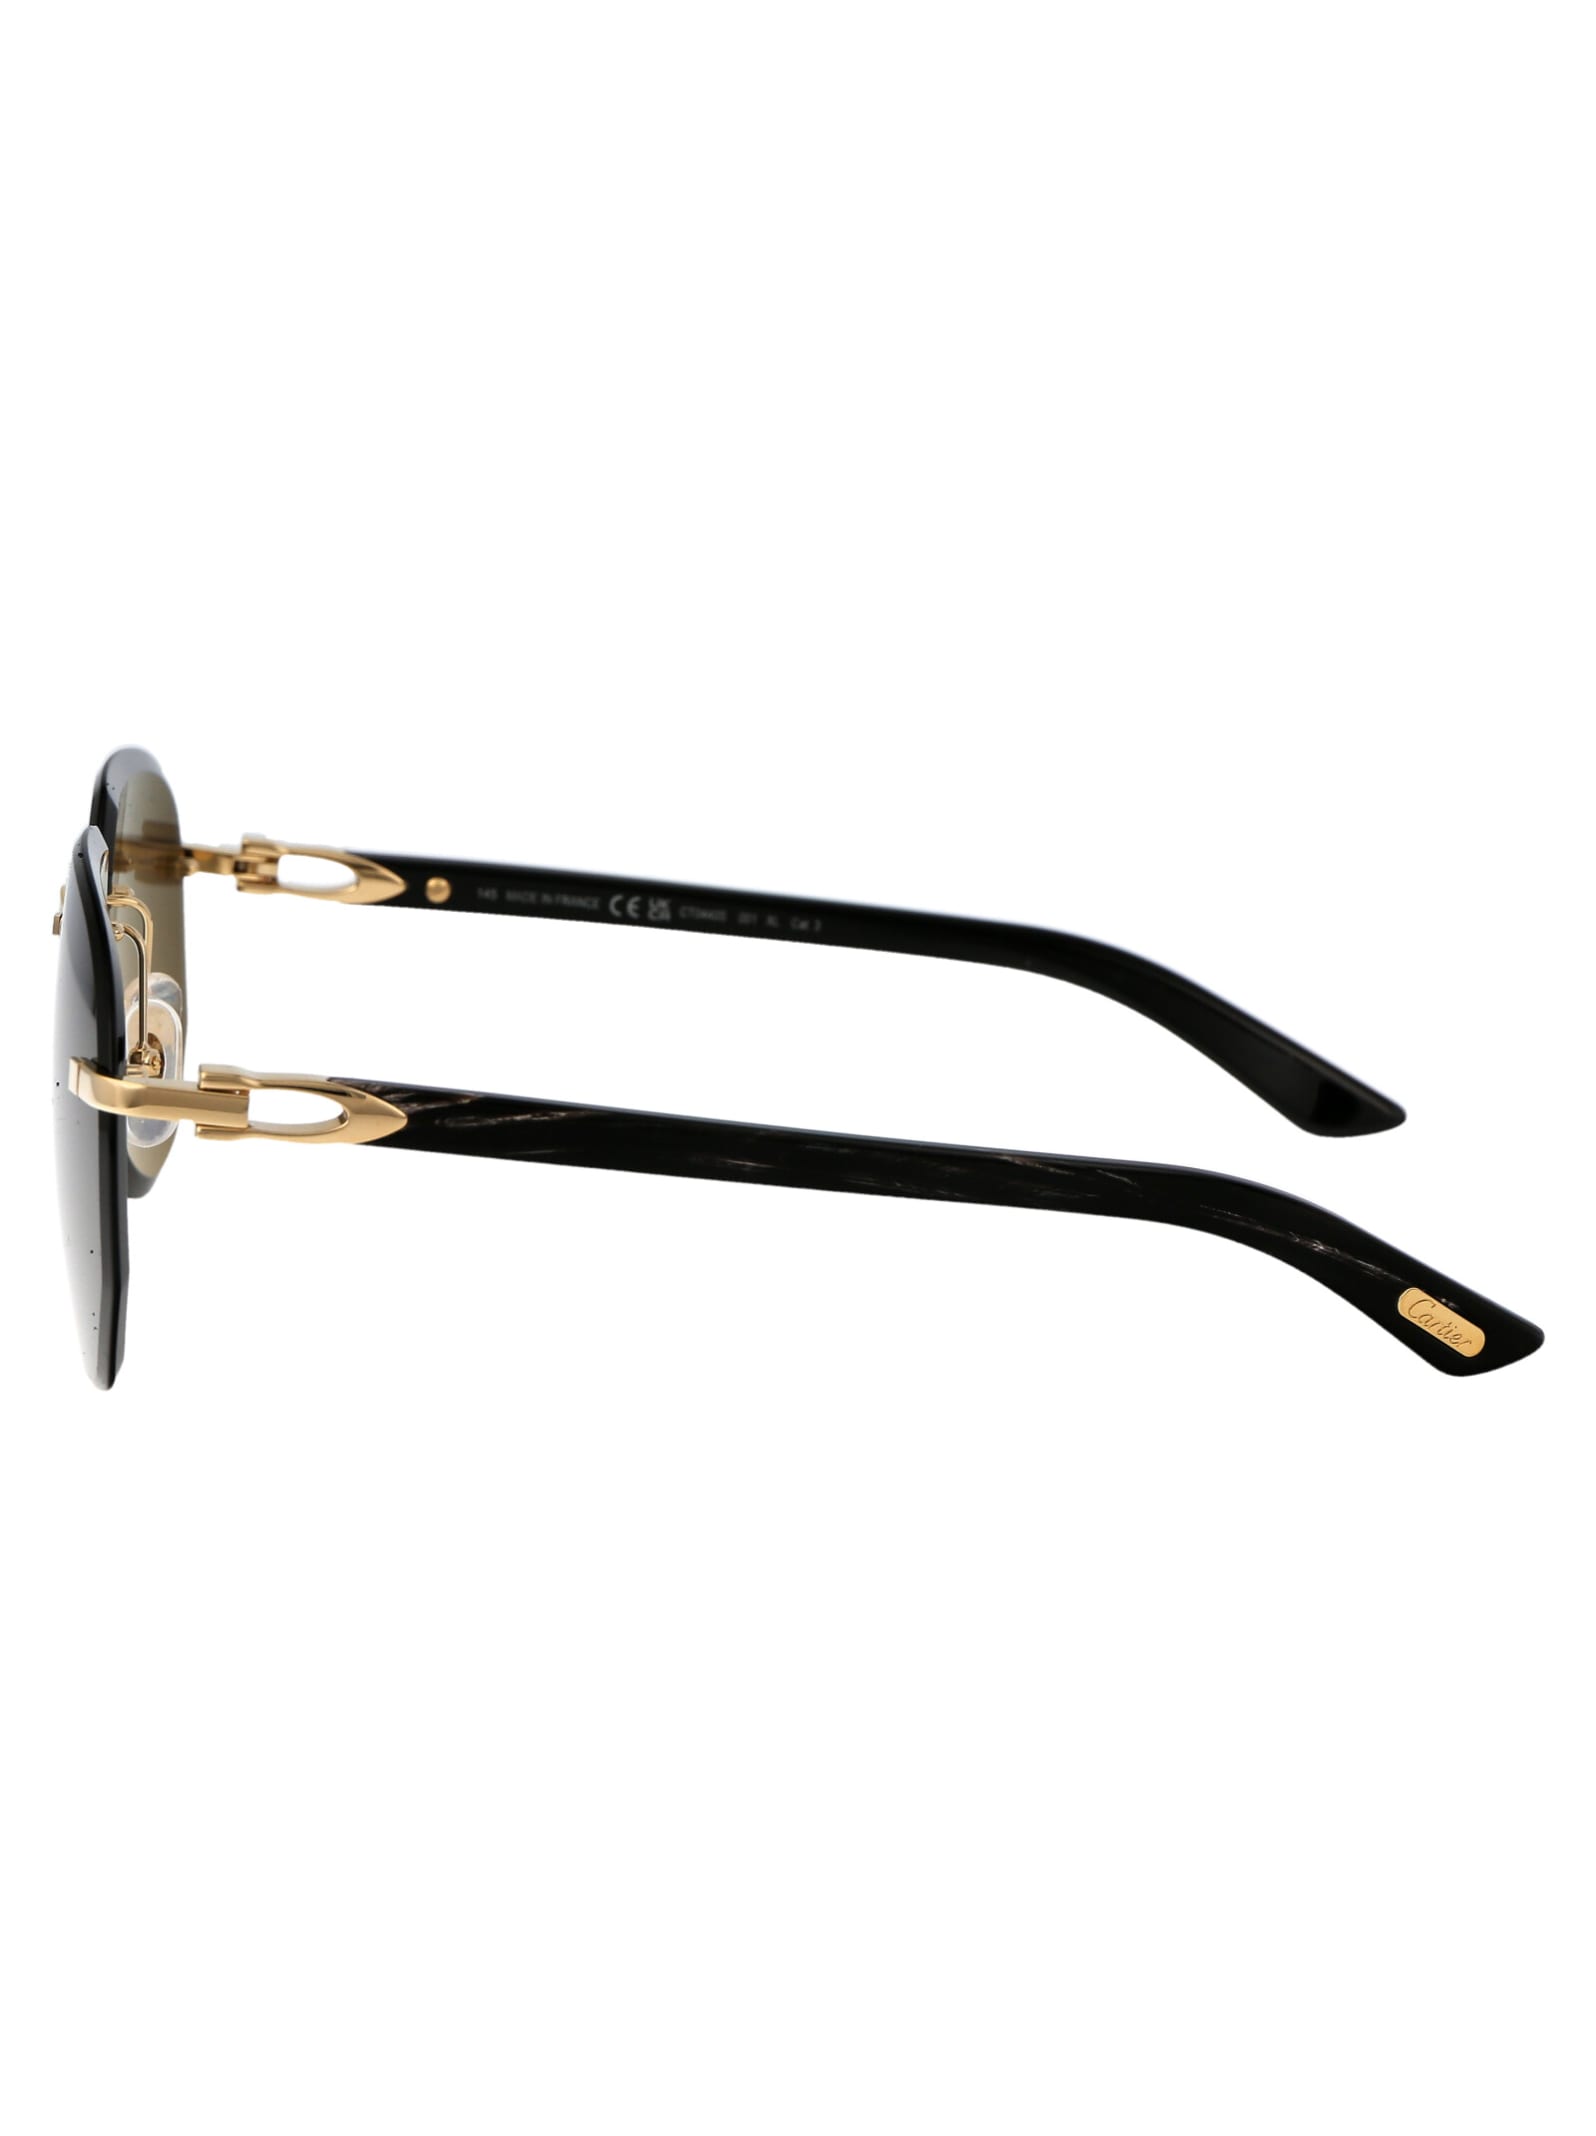 Shop Cartier Ct0440s Sunglasses In 001 Gold Black Grey